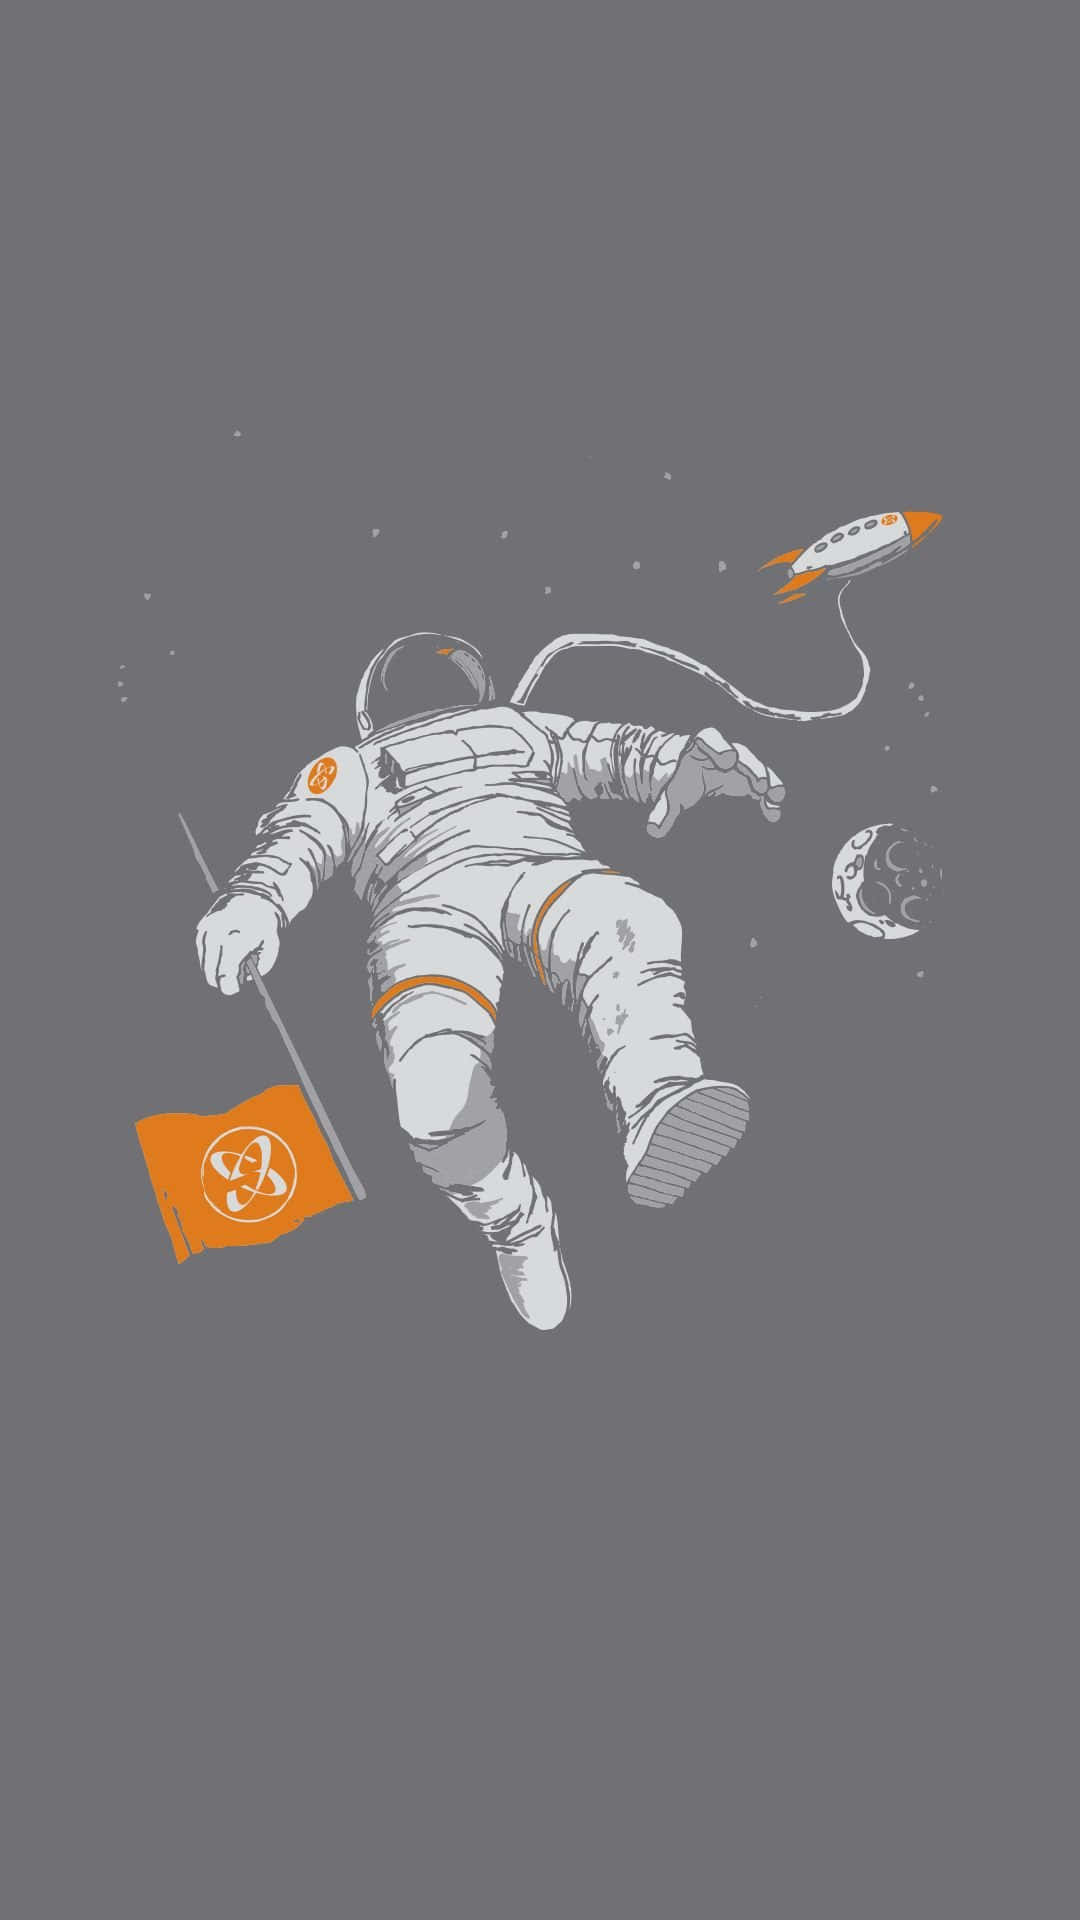 Make Every Moment Unique with the Astronaut Iphone Wallpaper